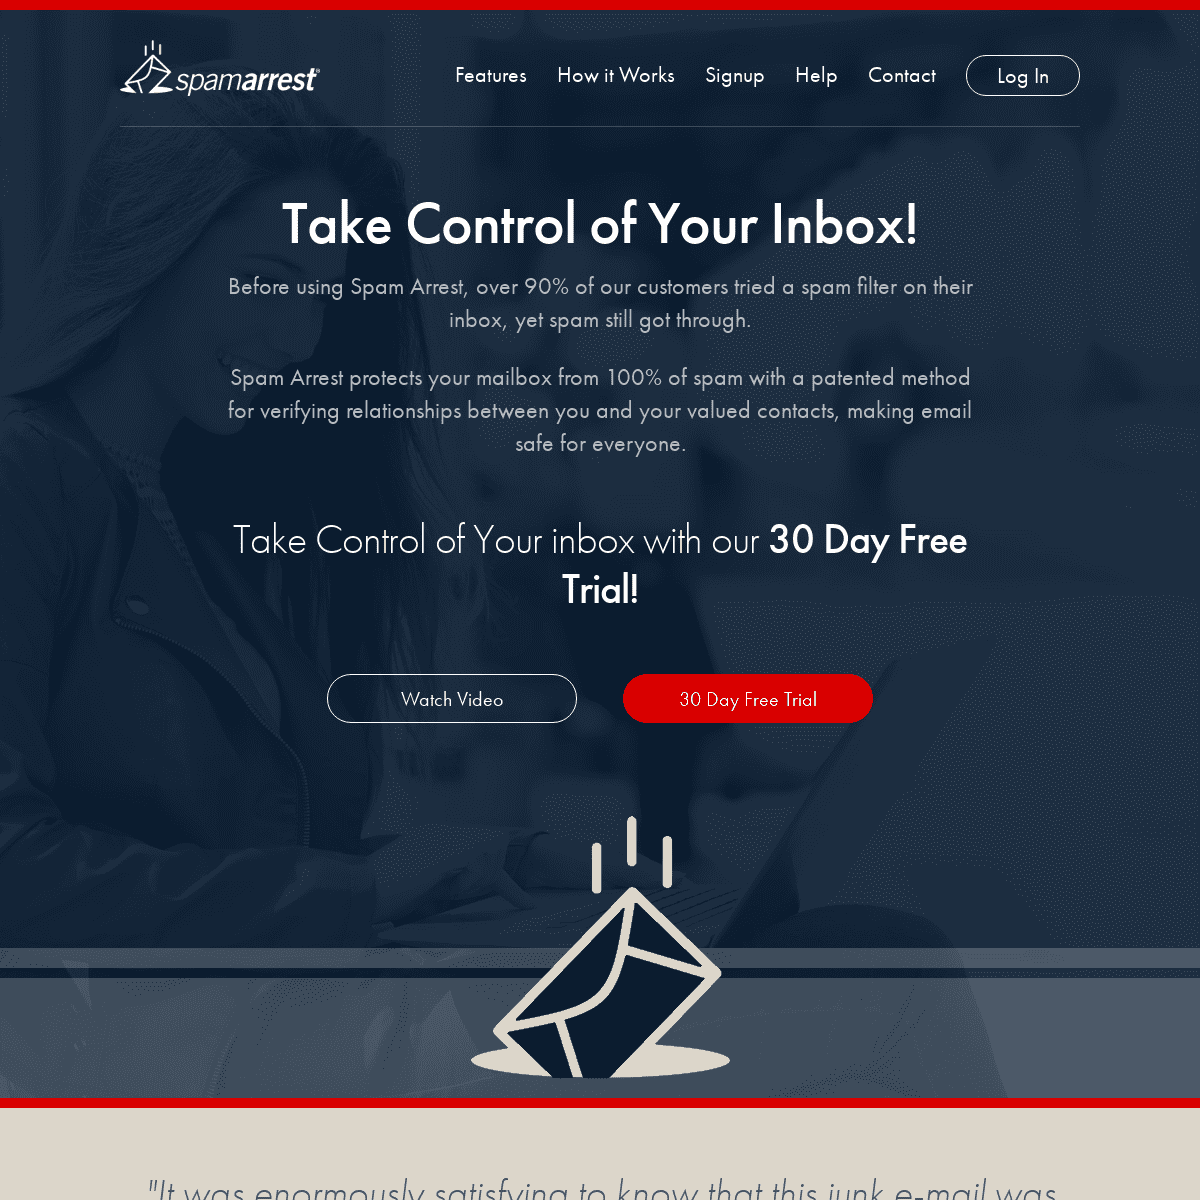 Spam Arrest - Take Control of Your Inbox®